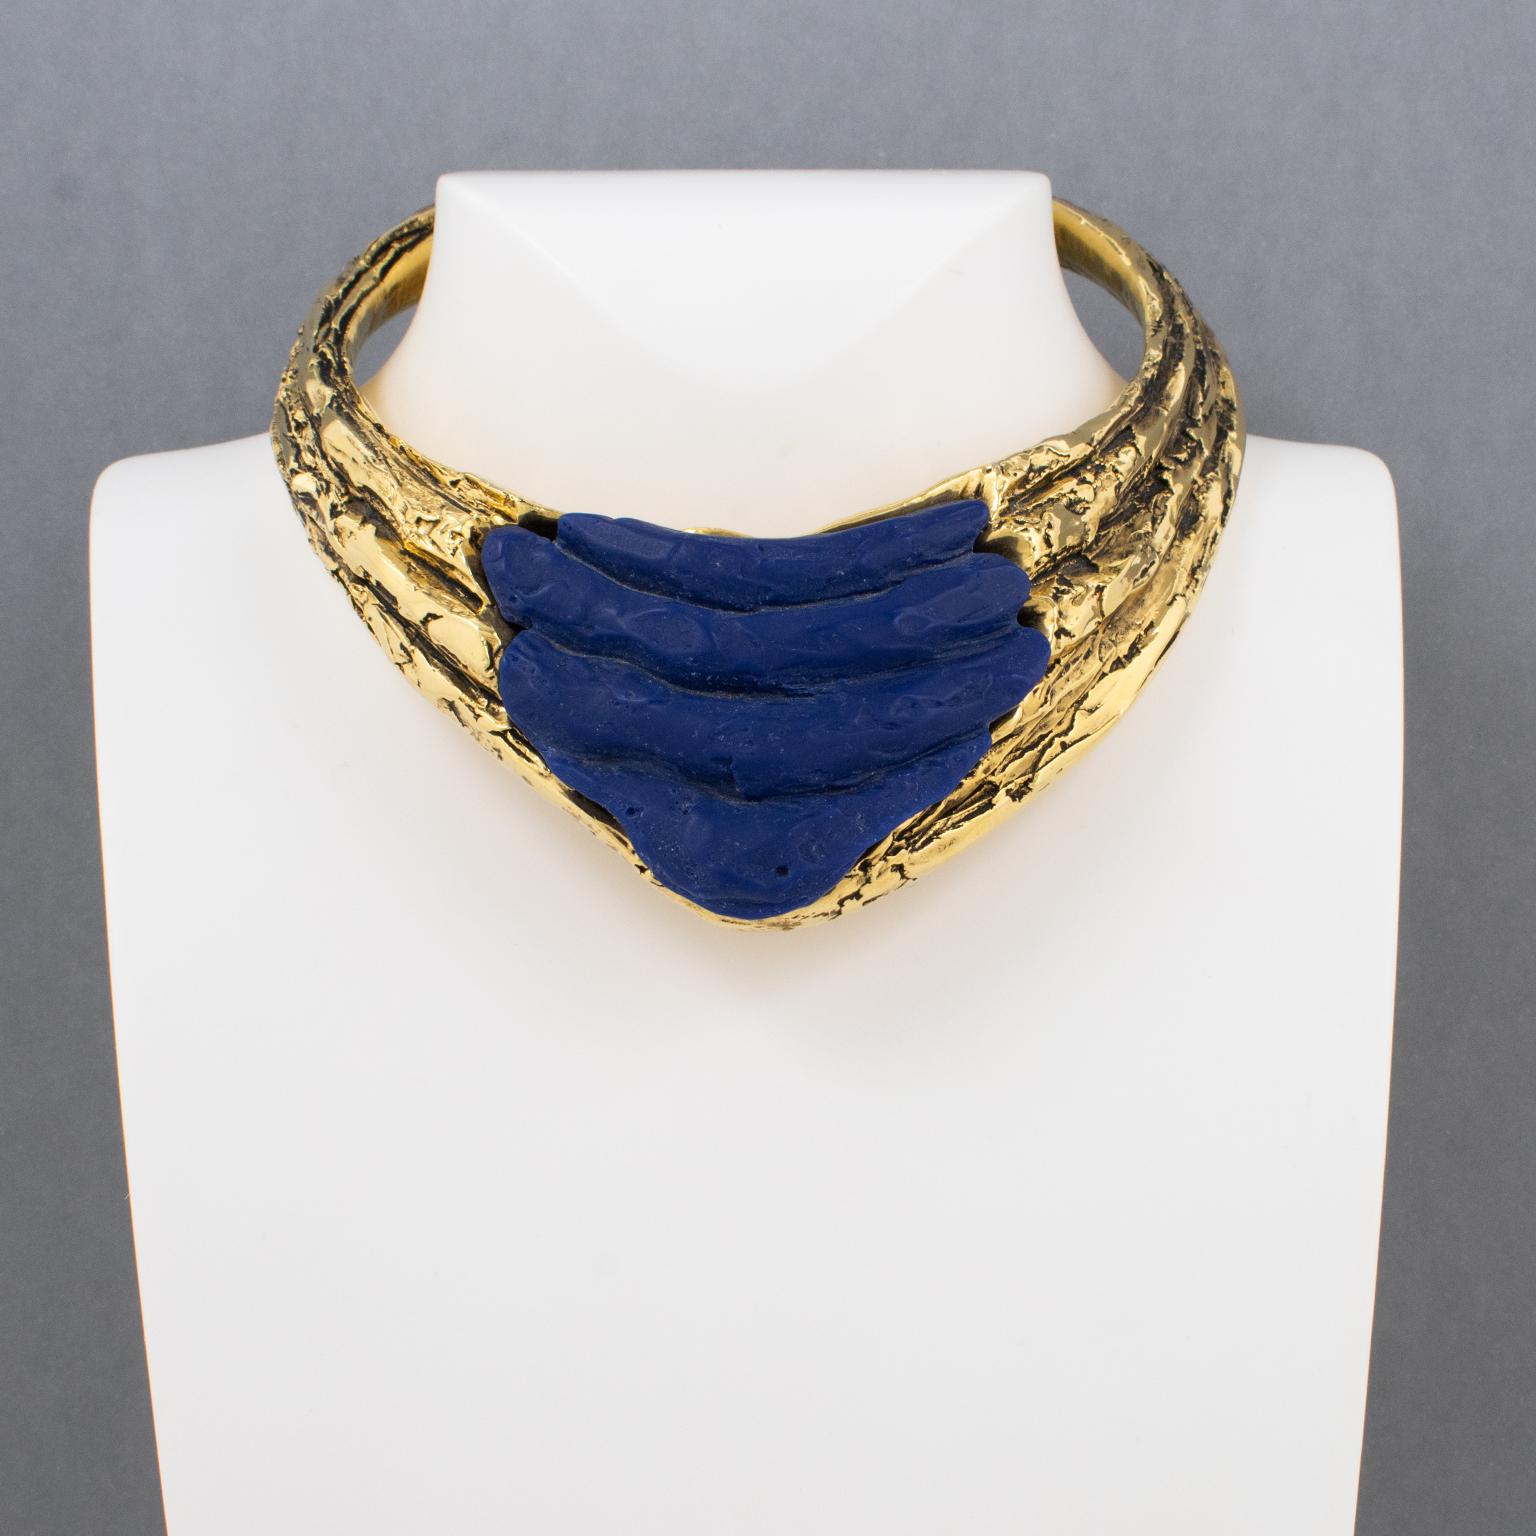 Modernist Claude Montana for Claire Deve Massive Futuristic Gilt and Blue Resin Necklace For Sale